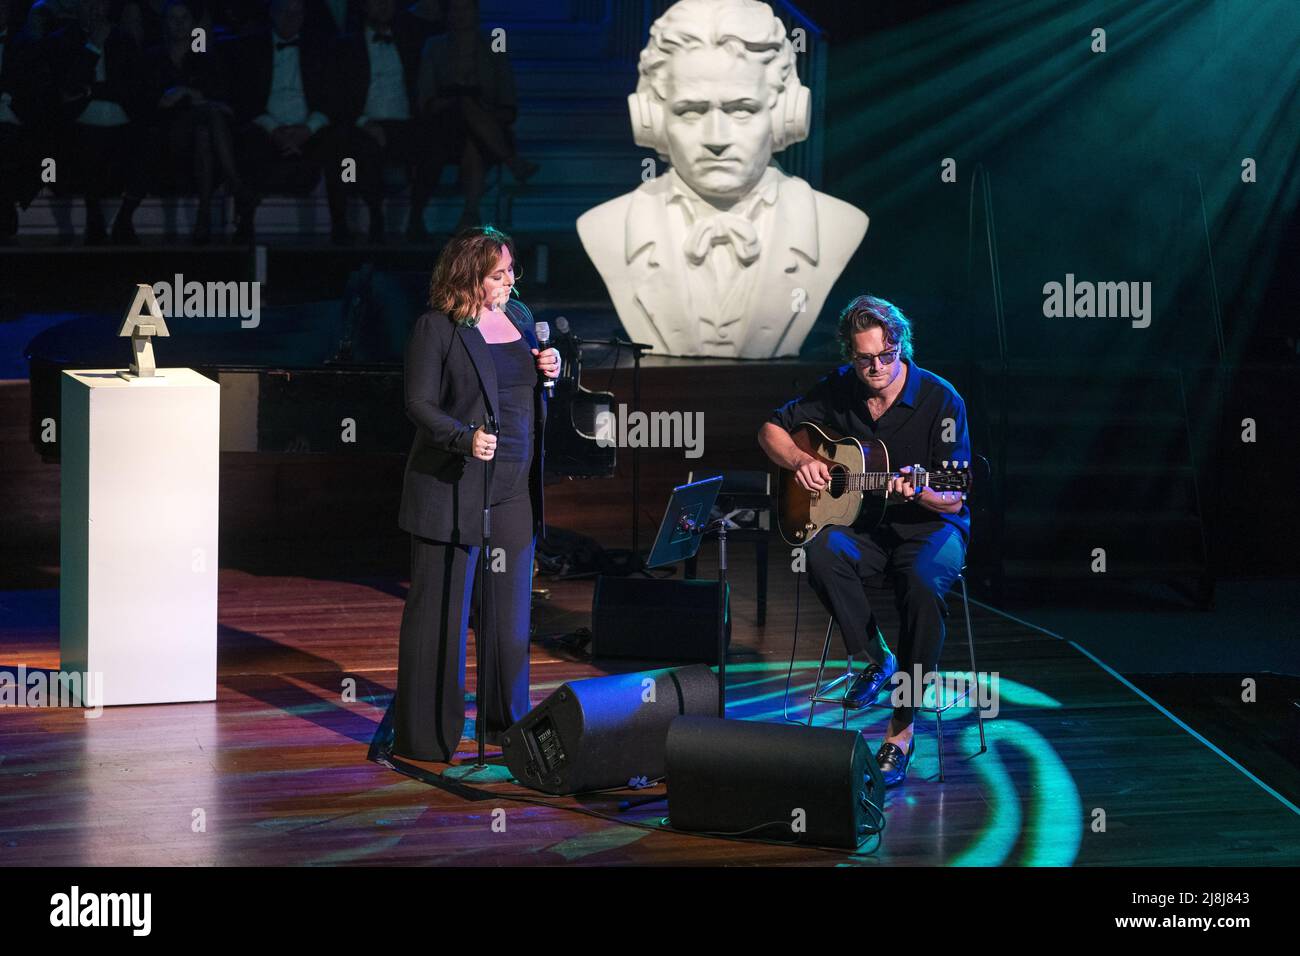 2022-05-16 17:21:20 BUSSUM - Trijntje Oosterhuis and Xander Vrienten perform together during the presentation of the Buma Awards in Spant. The Lennart Nijgh Prize was awarded posthumously to Henny Vrienten. The awards are presented to composers, lyricists and their music publishers in various categories. ANP JEROEN JUMELET netherlands out - belgium out Stock Photo